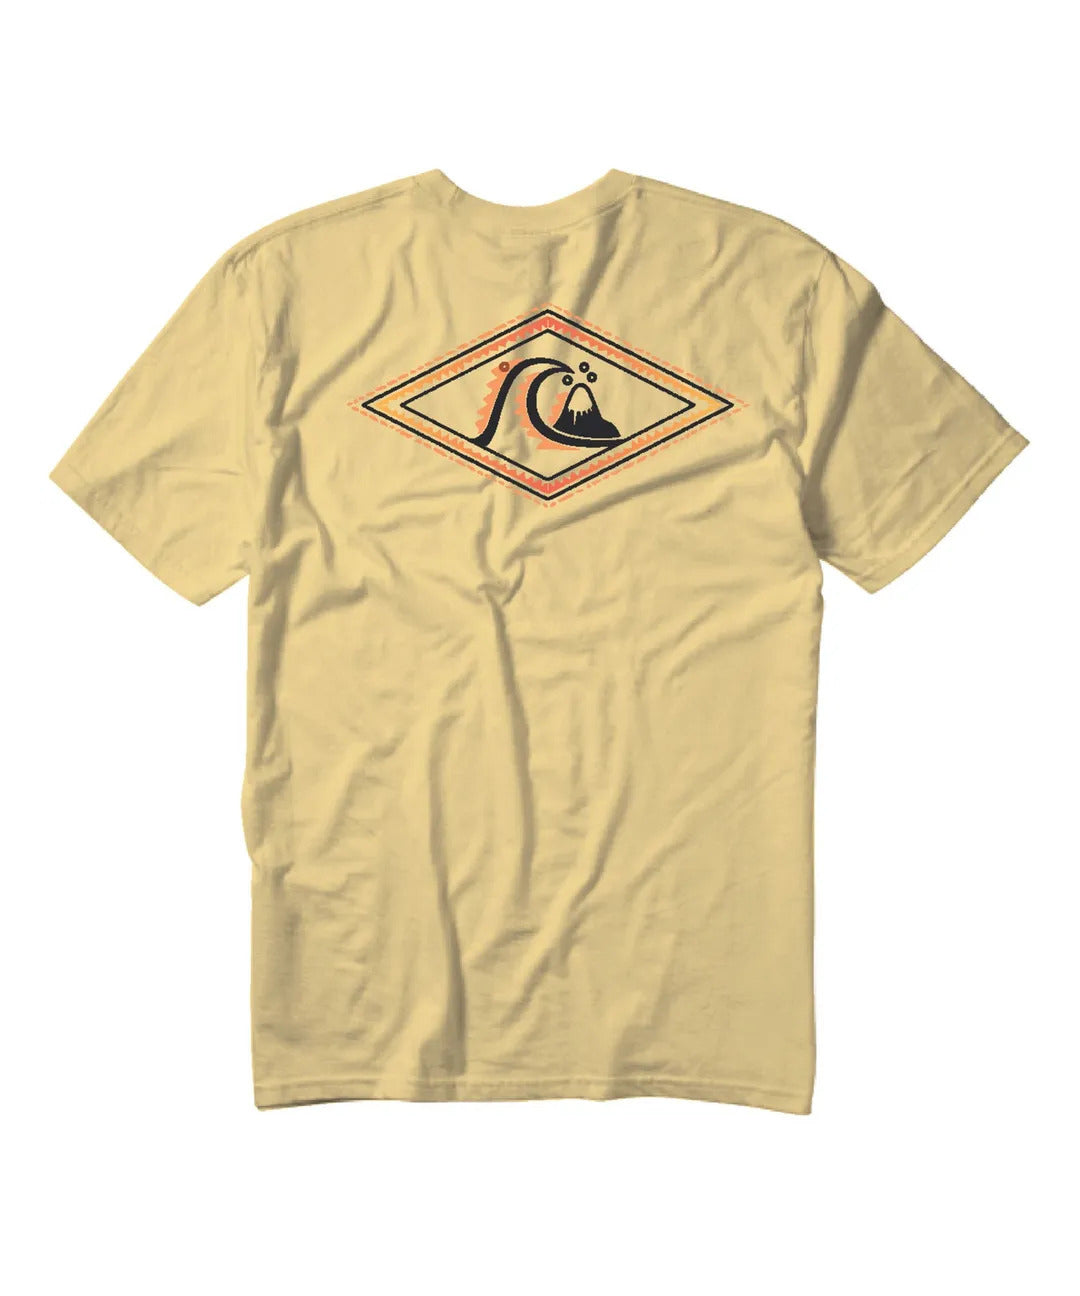 Quiksilver Funk Express SS Tee YDZ0 S